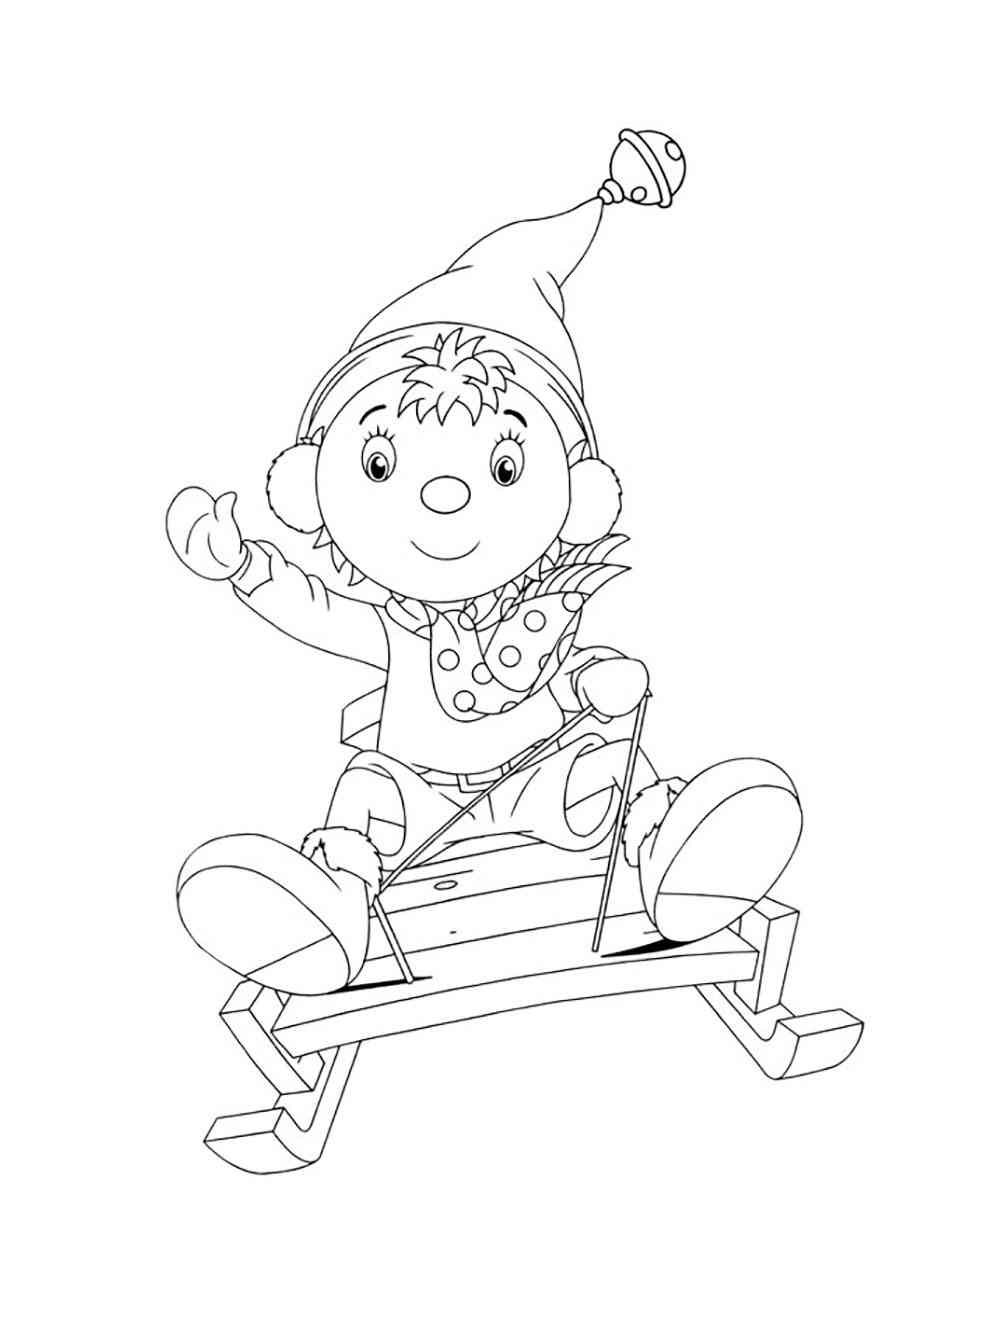 Noddy coloring pages. Free Printable Noddy coloring pages.